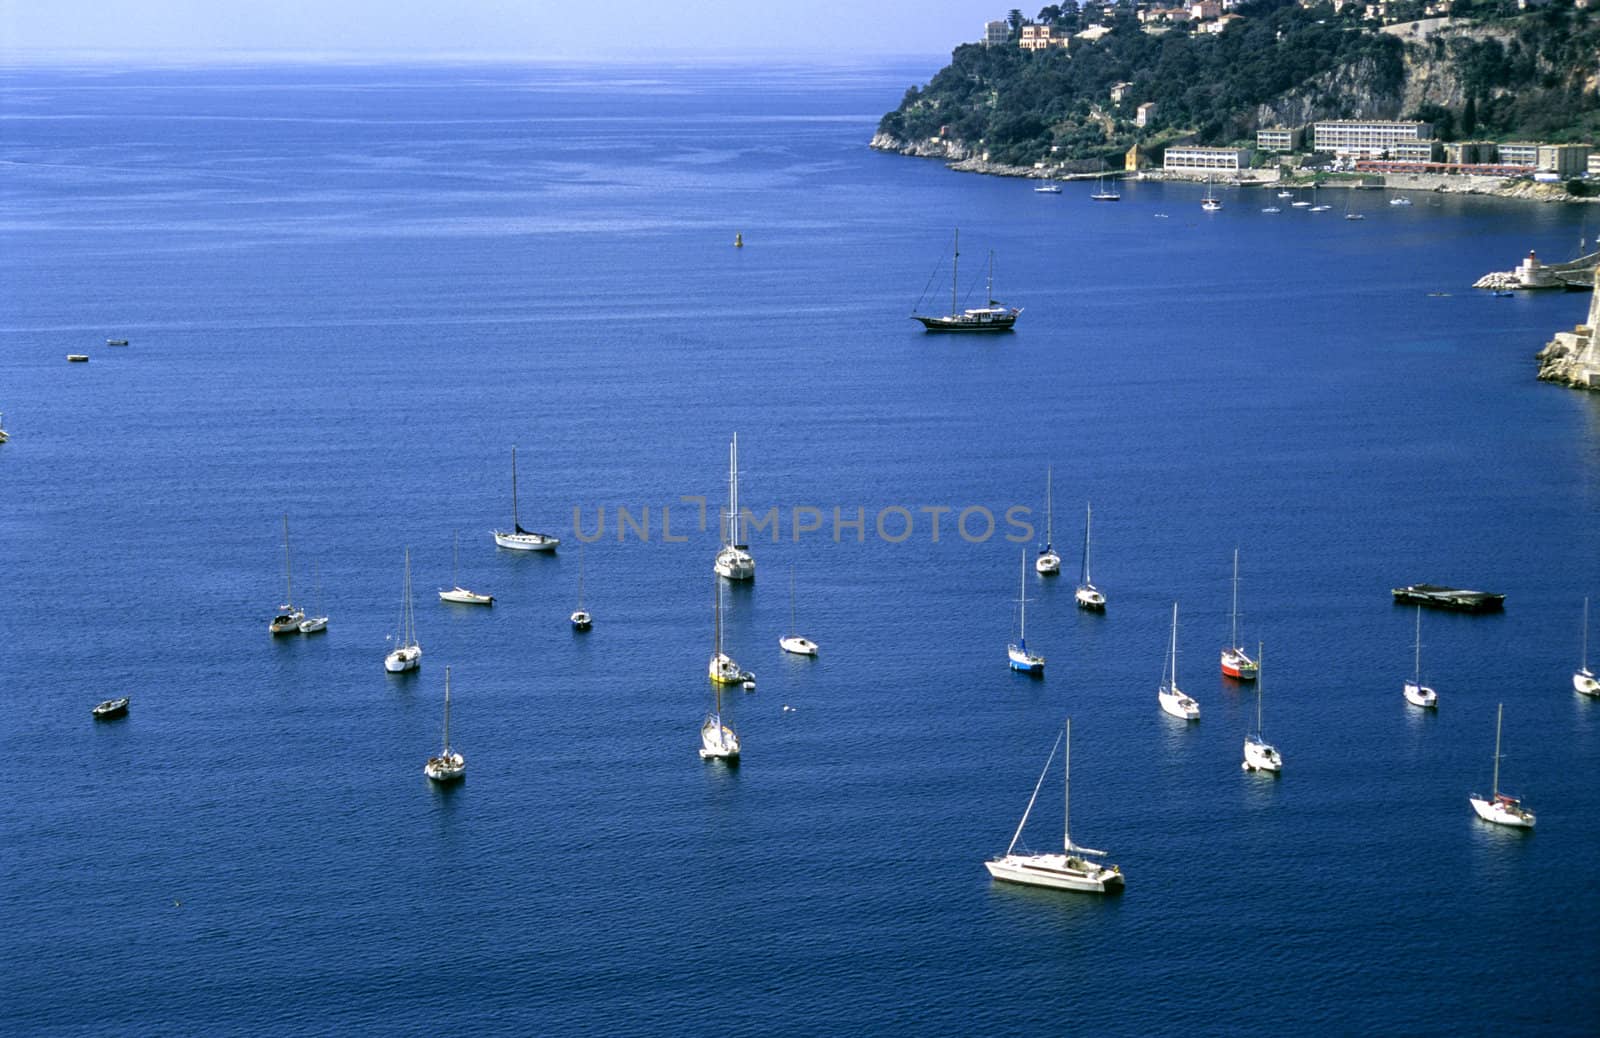 Sailboats of all different sizes dot the Mediterranean coast of France.